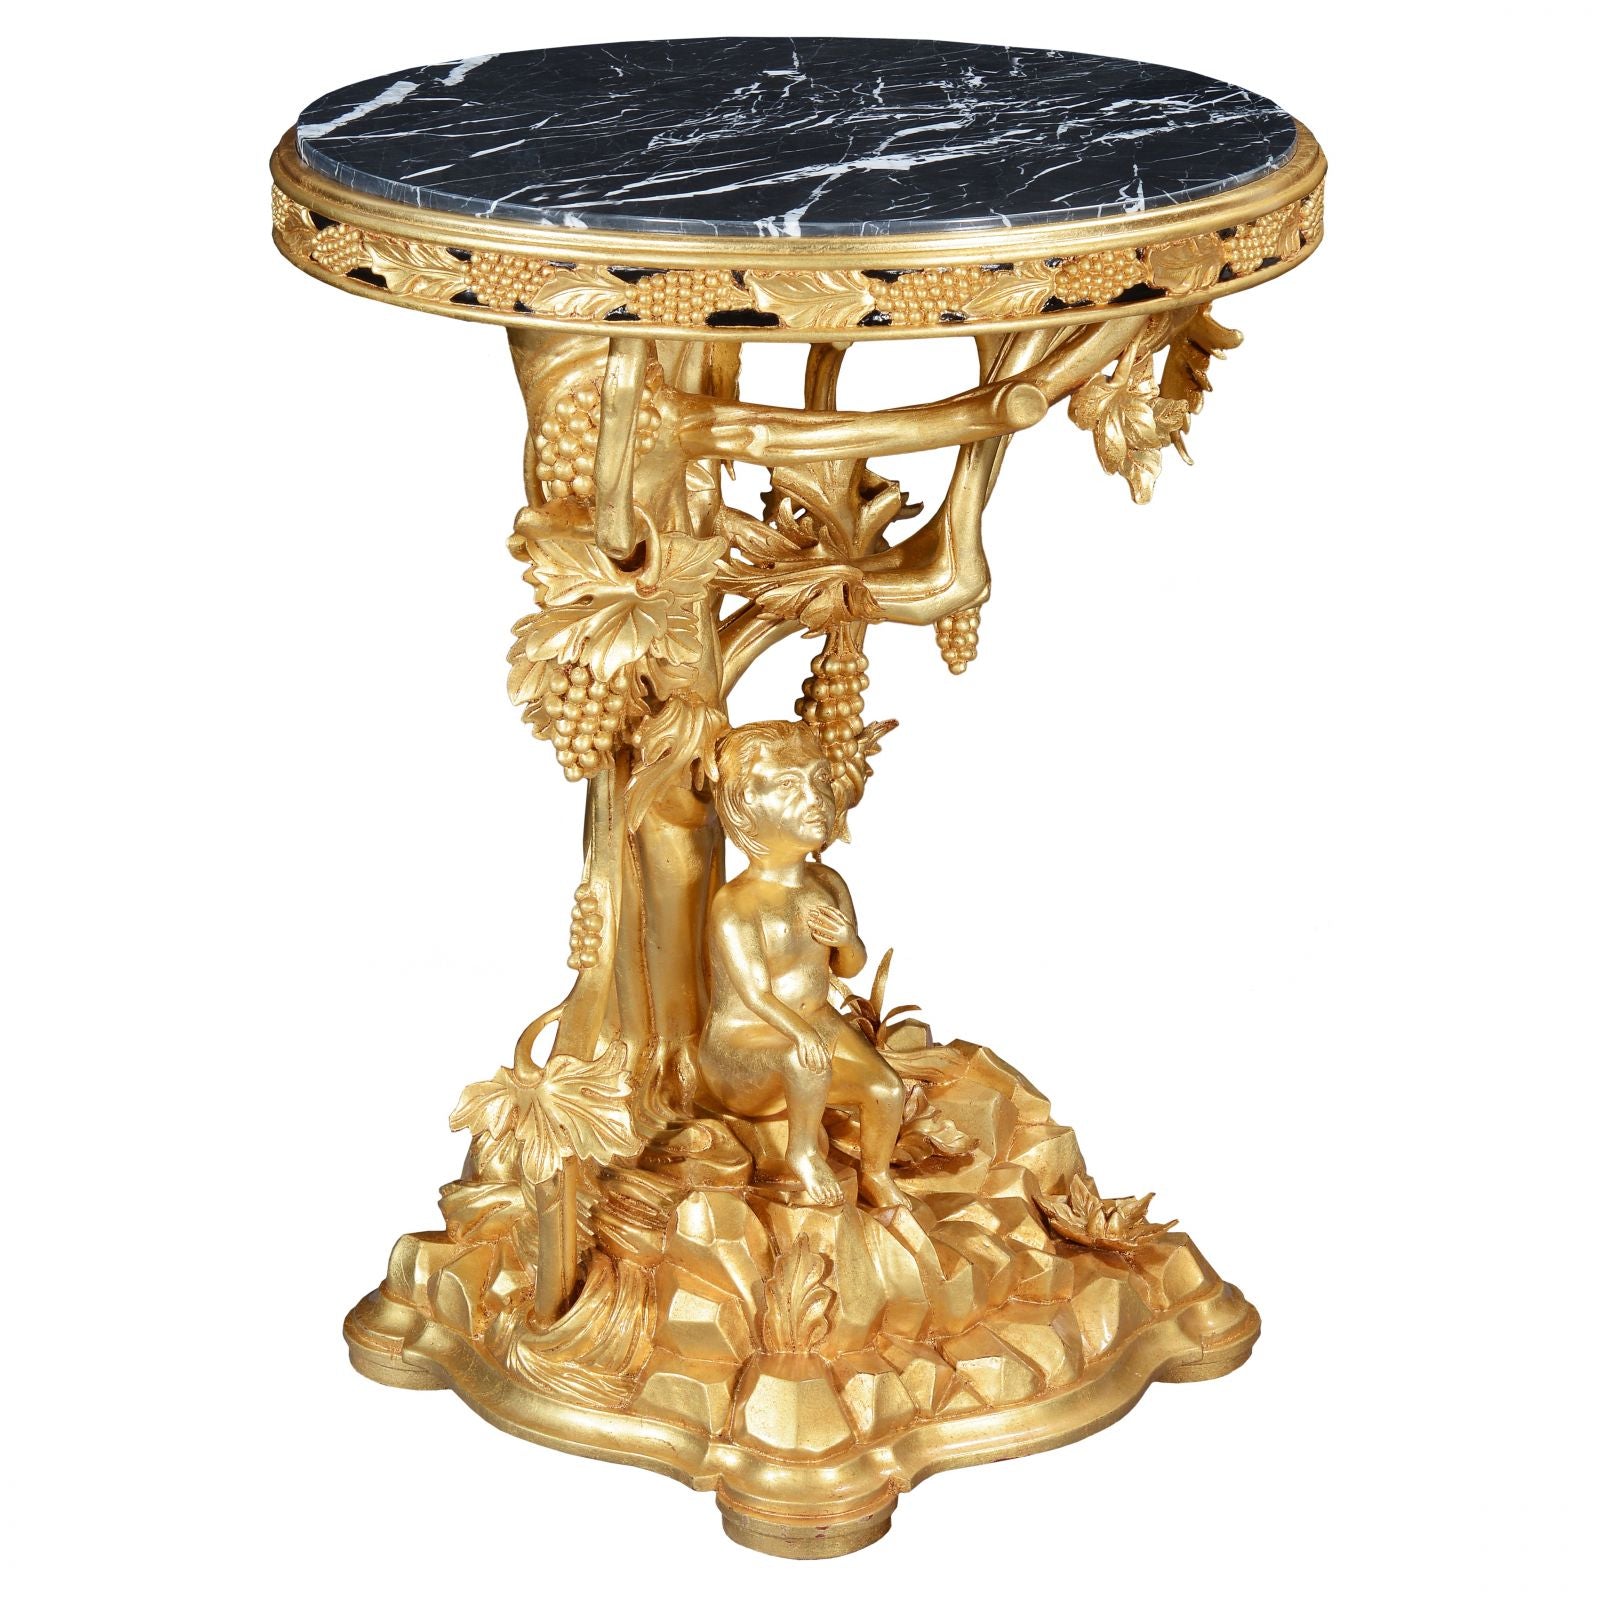 Italian style grapevine centre table - Gold leaf